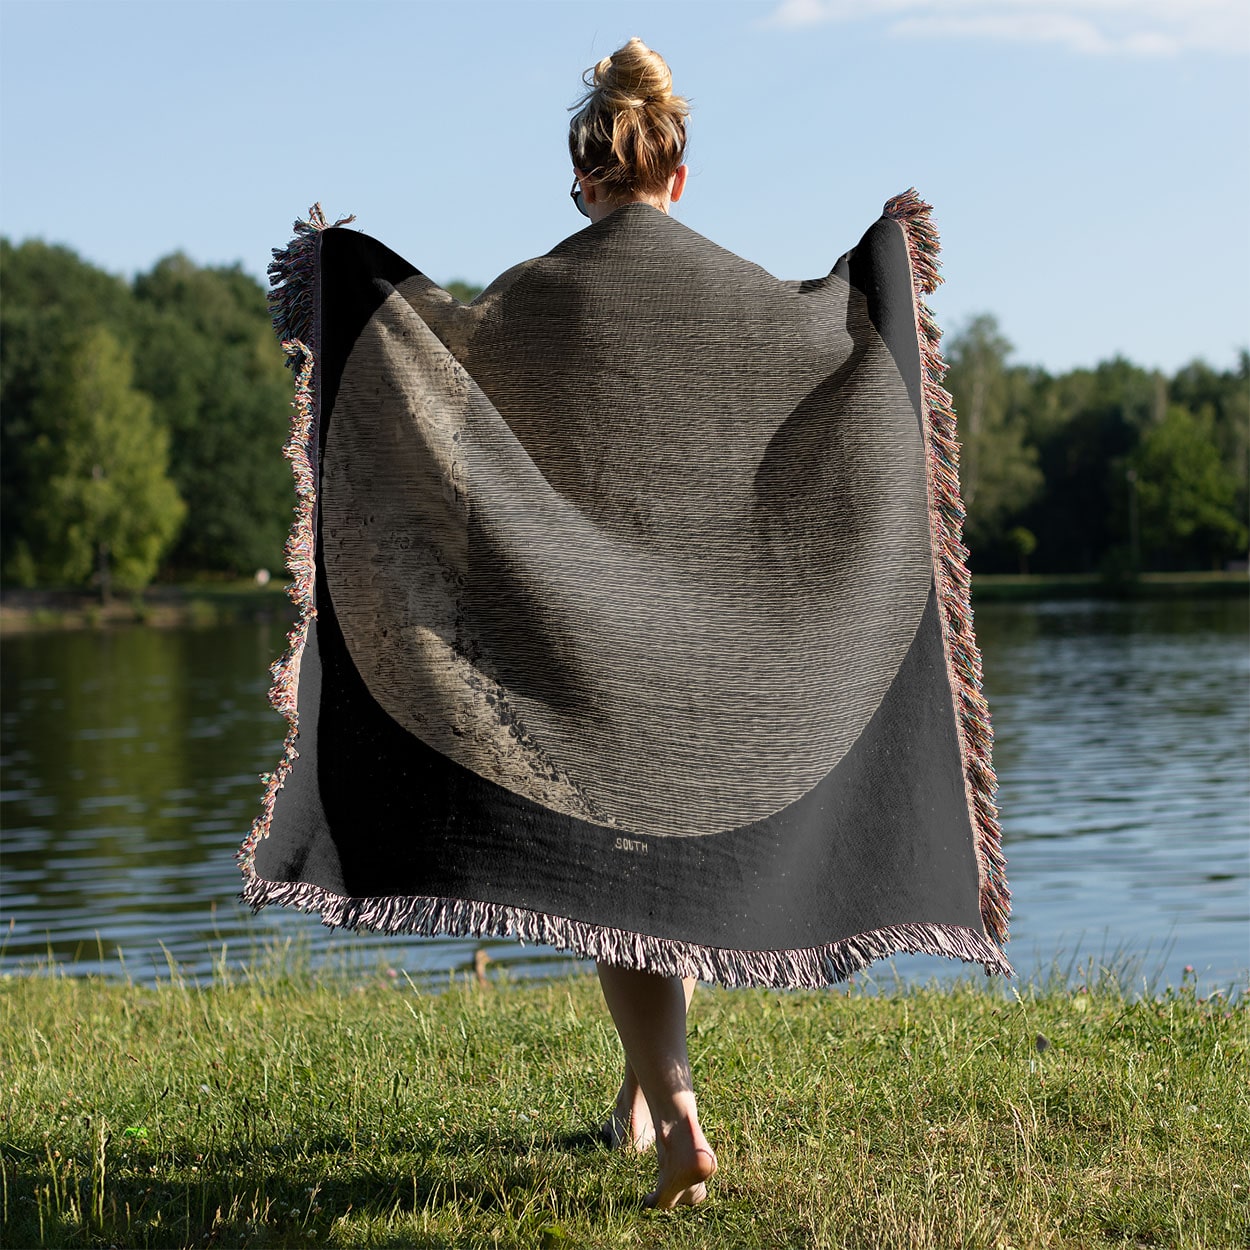 Astronomy Woven Blanket Held on a Woman's Back Outside